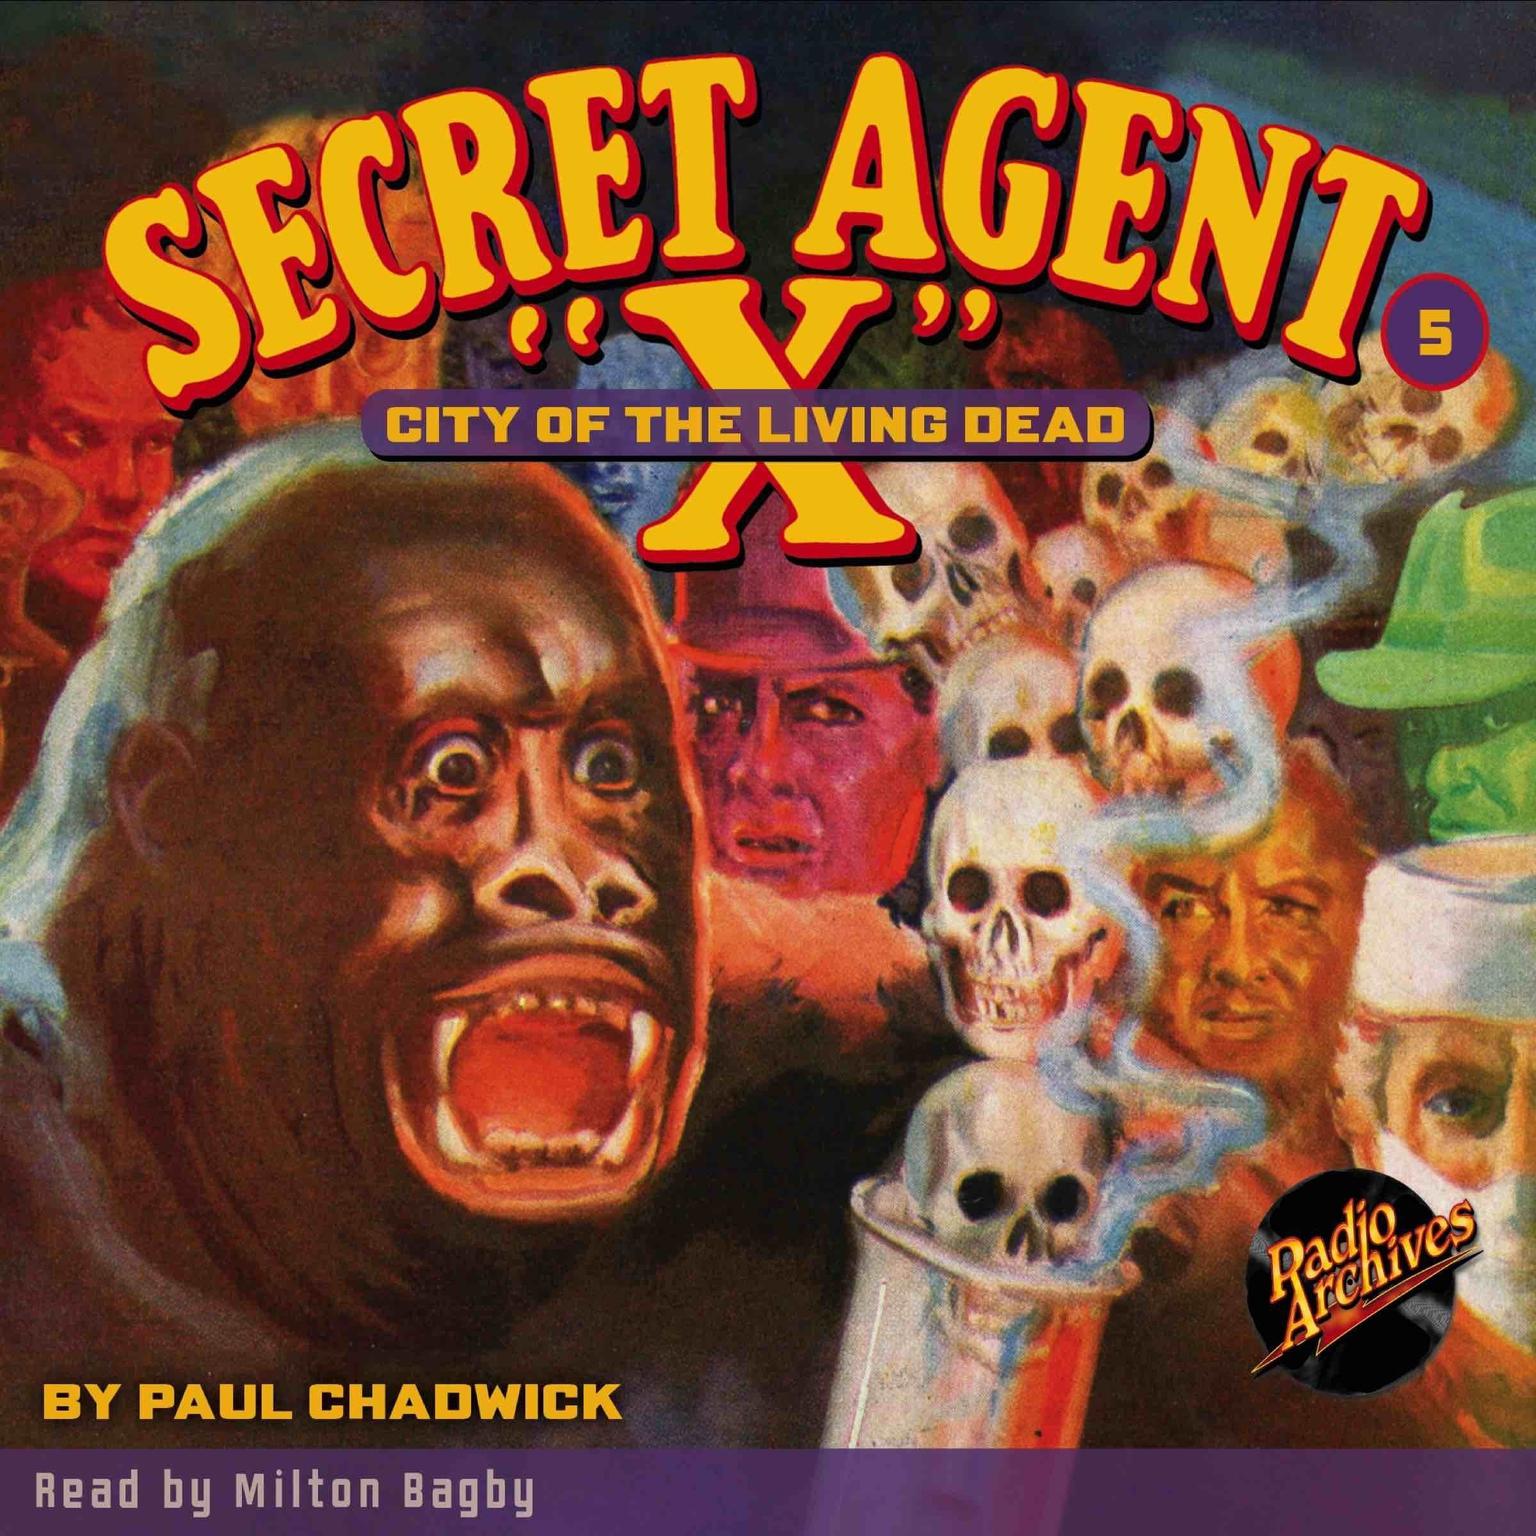 Secret Agent X: City of the Living Dead Audiobook, by Paul Chadwick